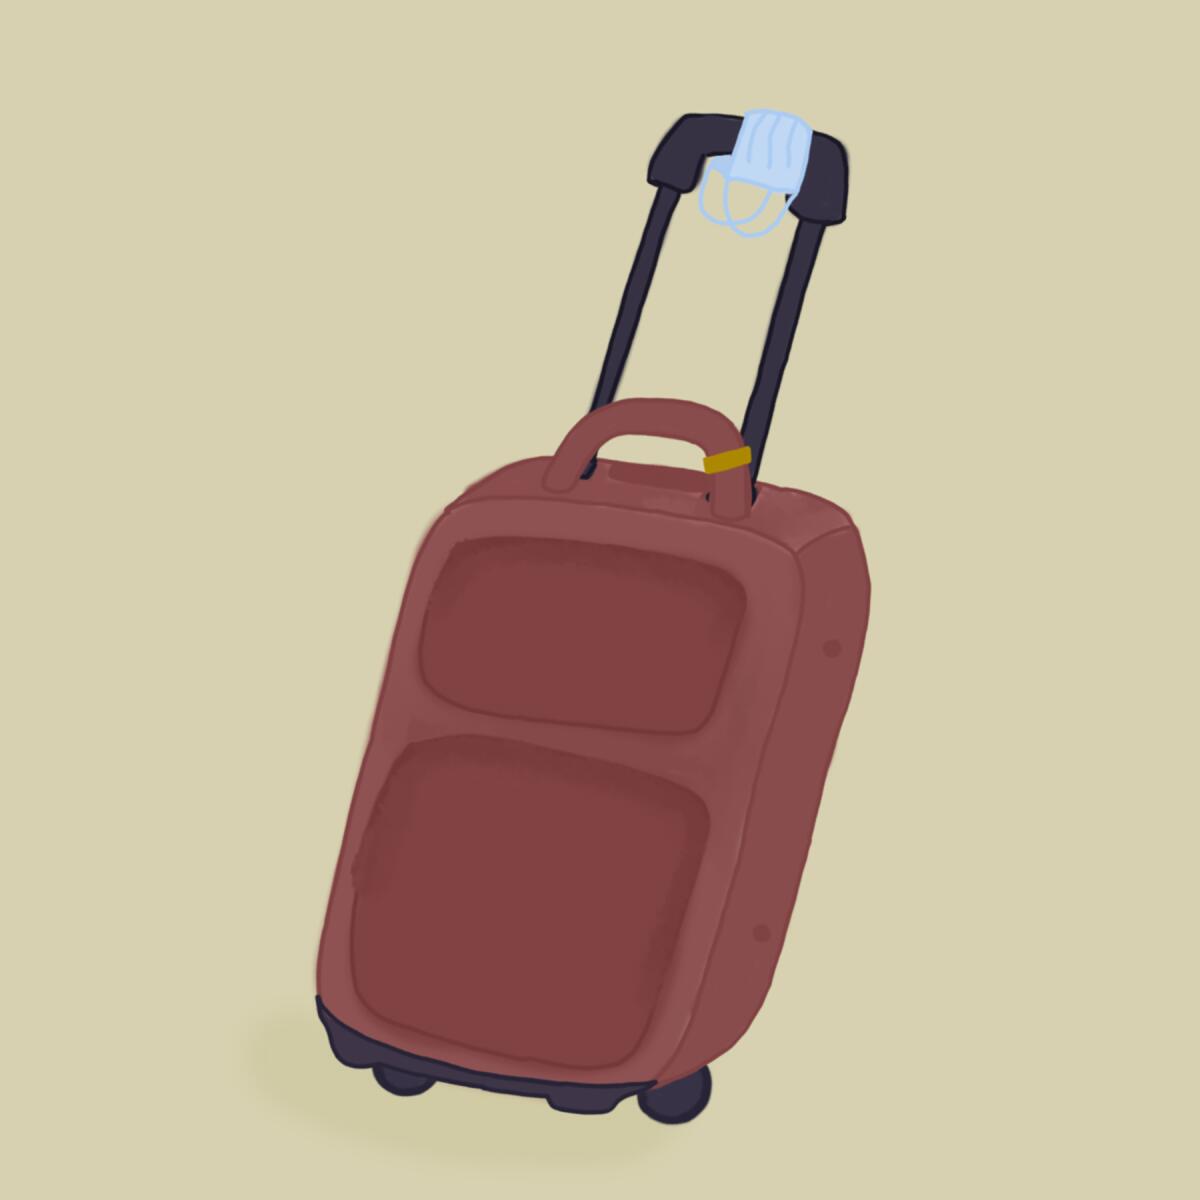 Illustration of a suitcase with a face mask on it.